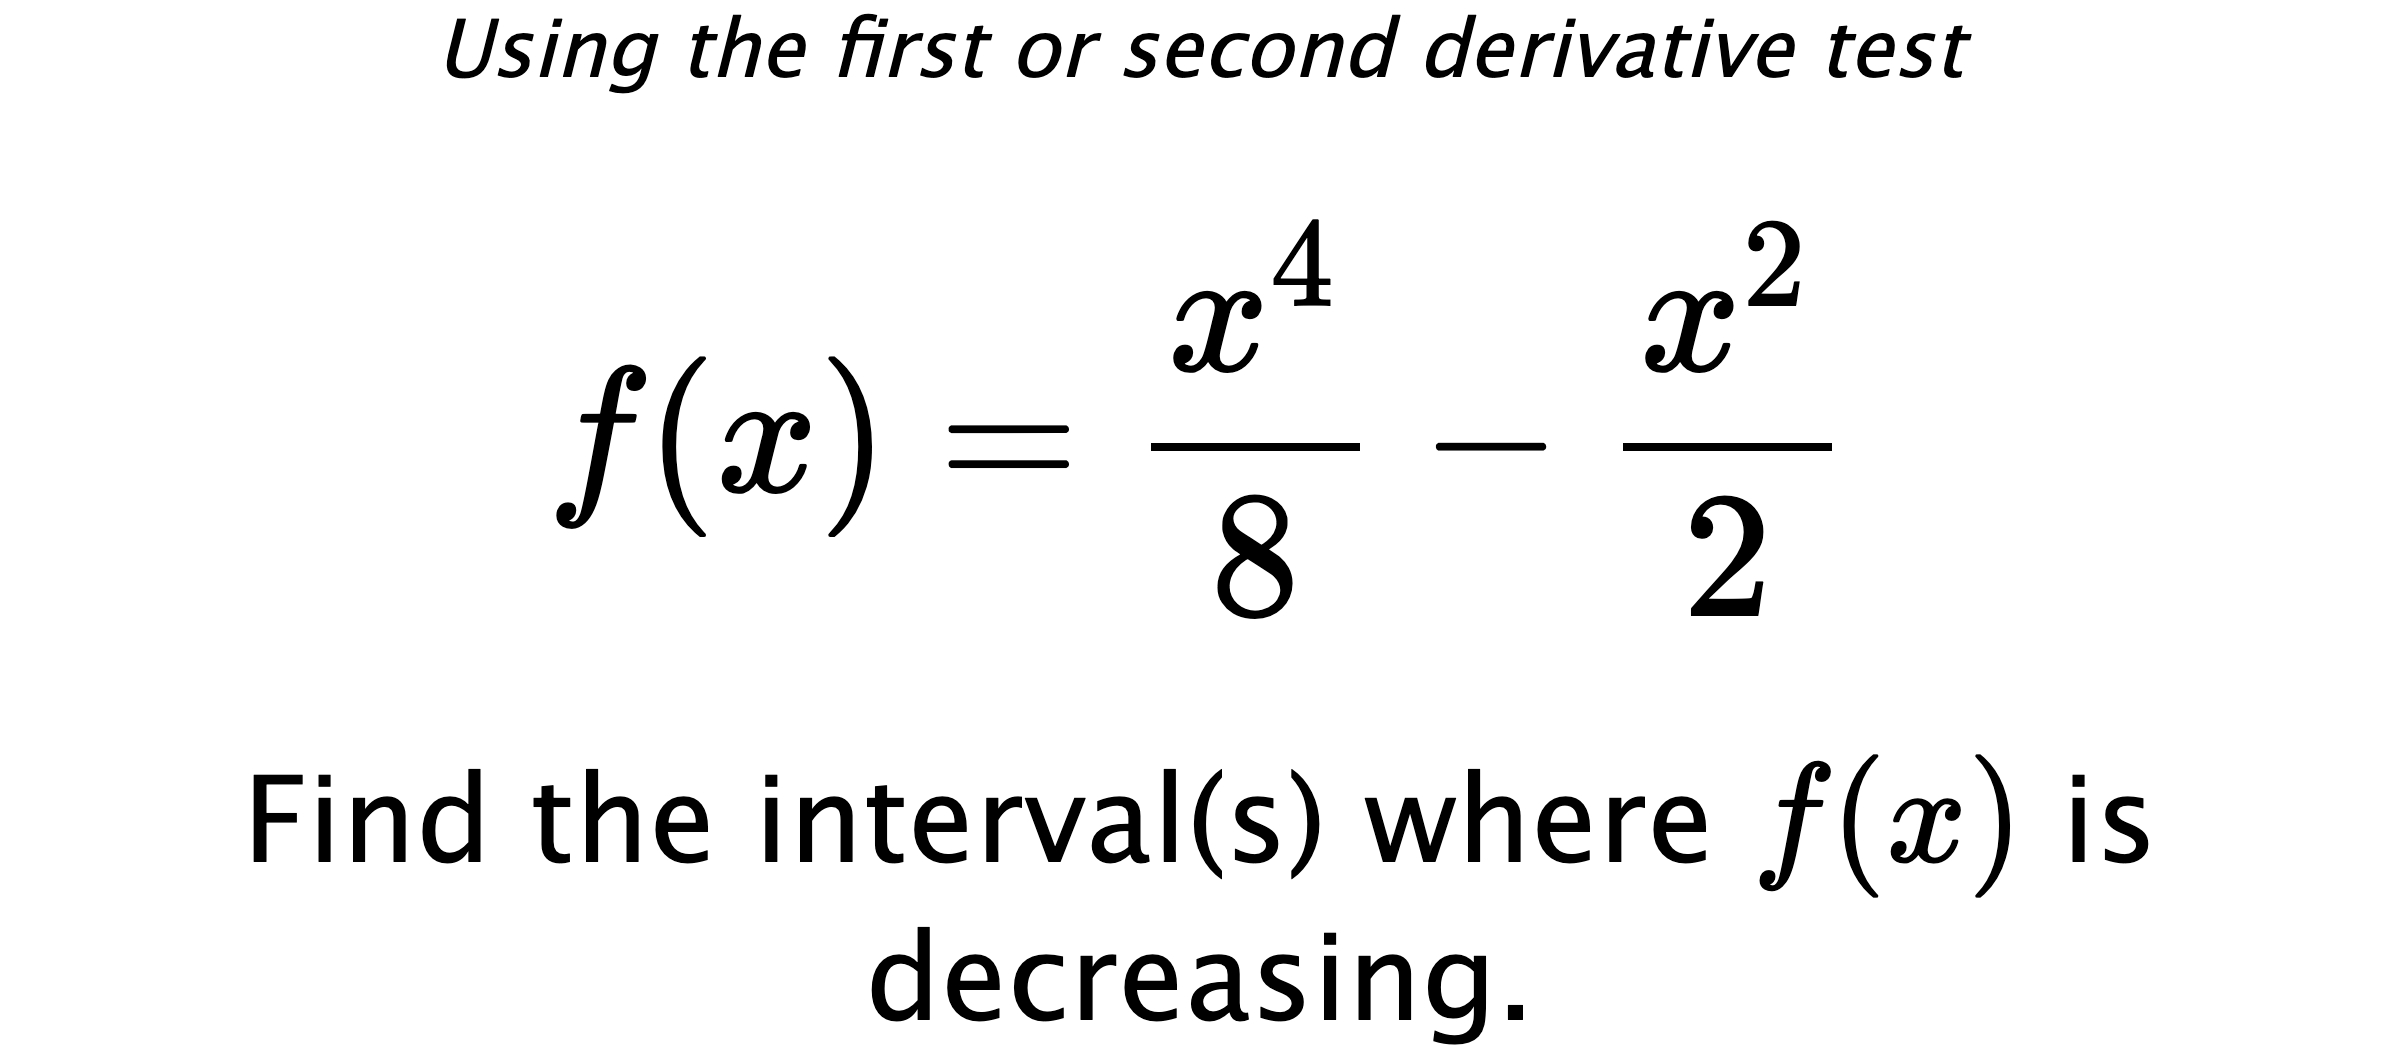 Using the first or second derivative test $$ f(x)=\frac{x^4}{8}-\frac{x^2}{2} $$ Find the interval(s) where $ f(x) $ is decreasing.